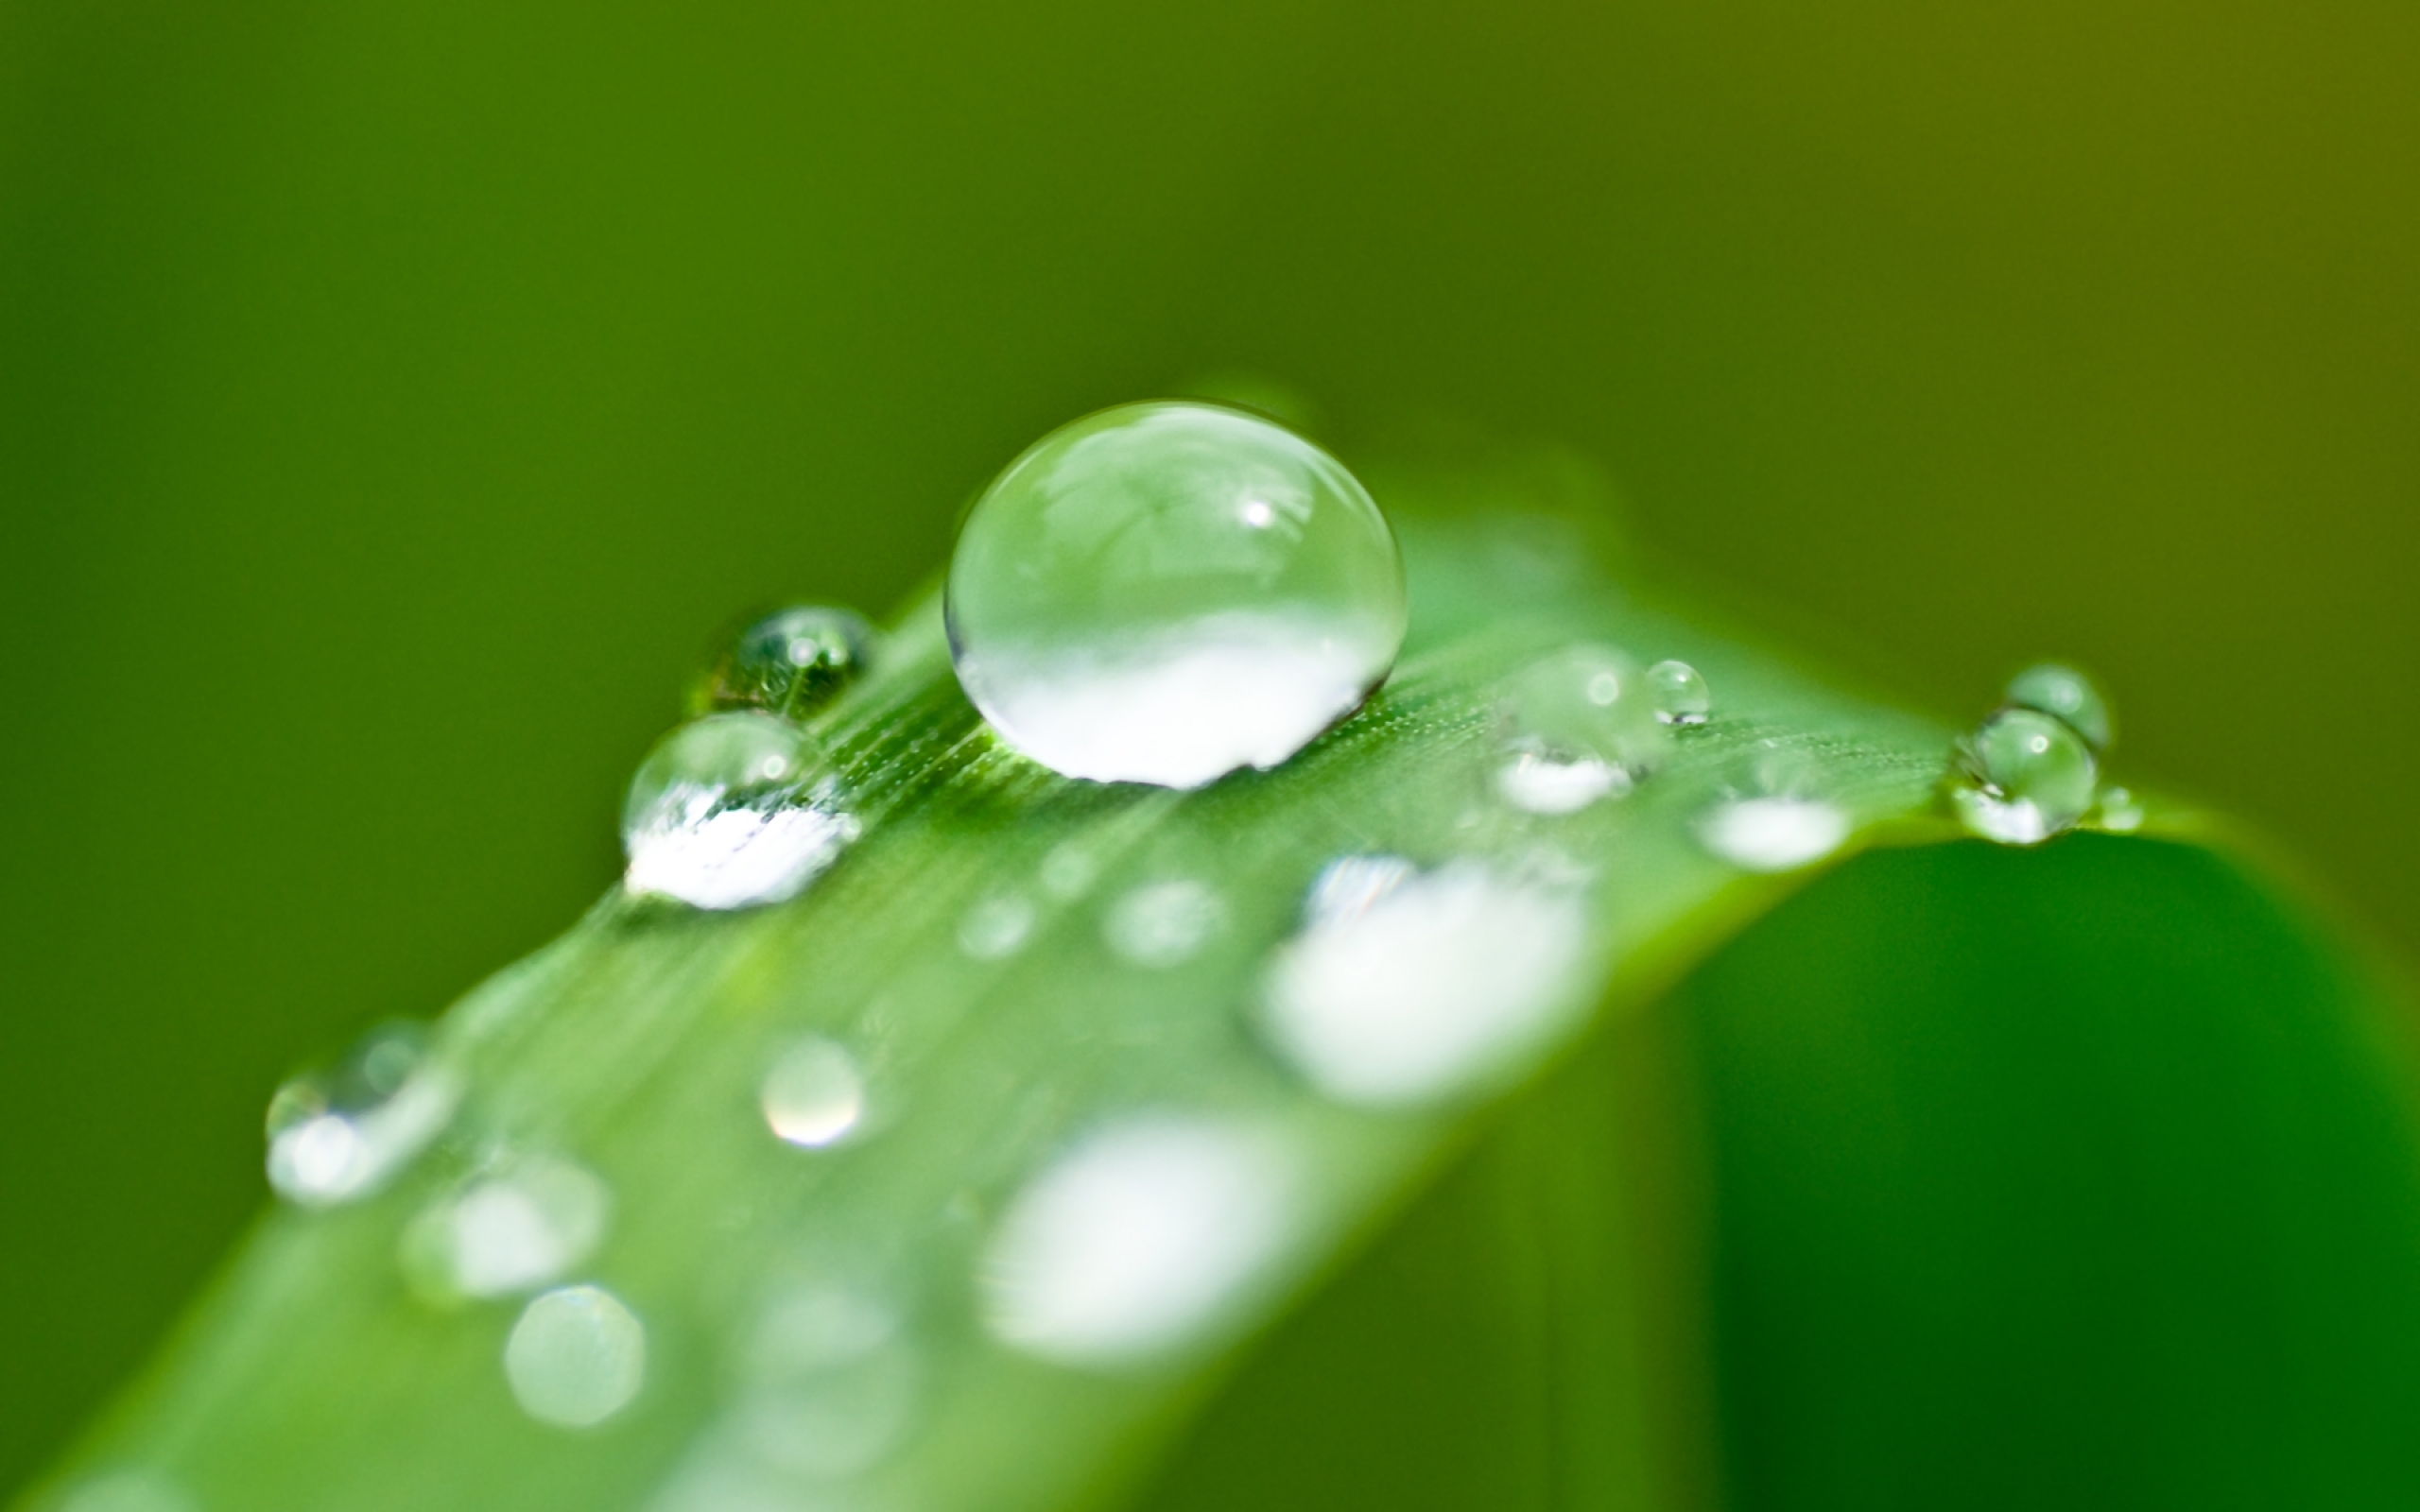 General 2560x1600 water water drops nature green forest depth of field blurred calm macro closeup